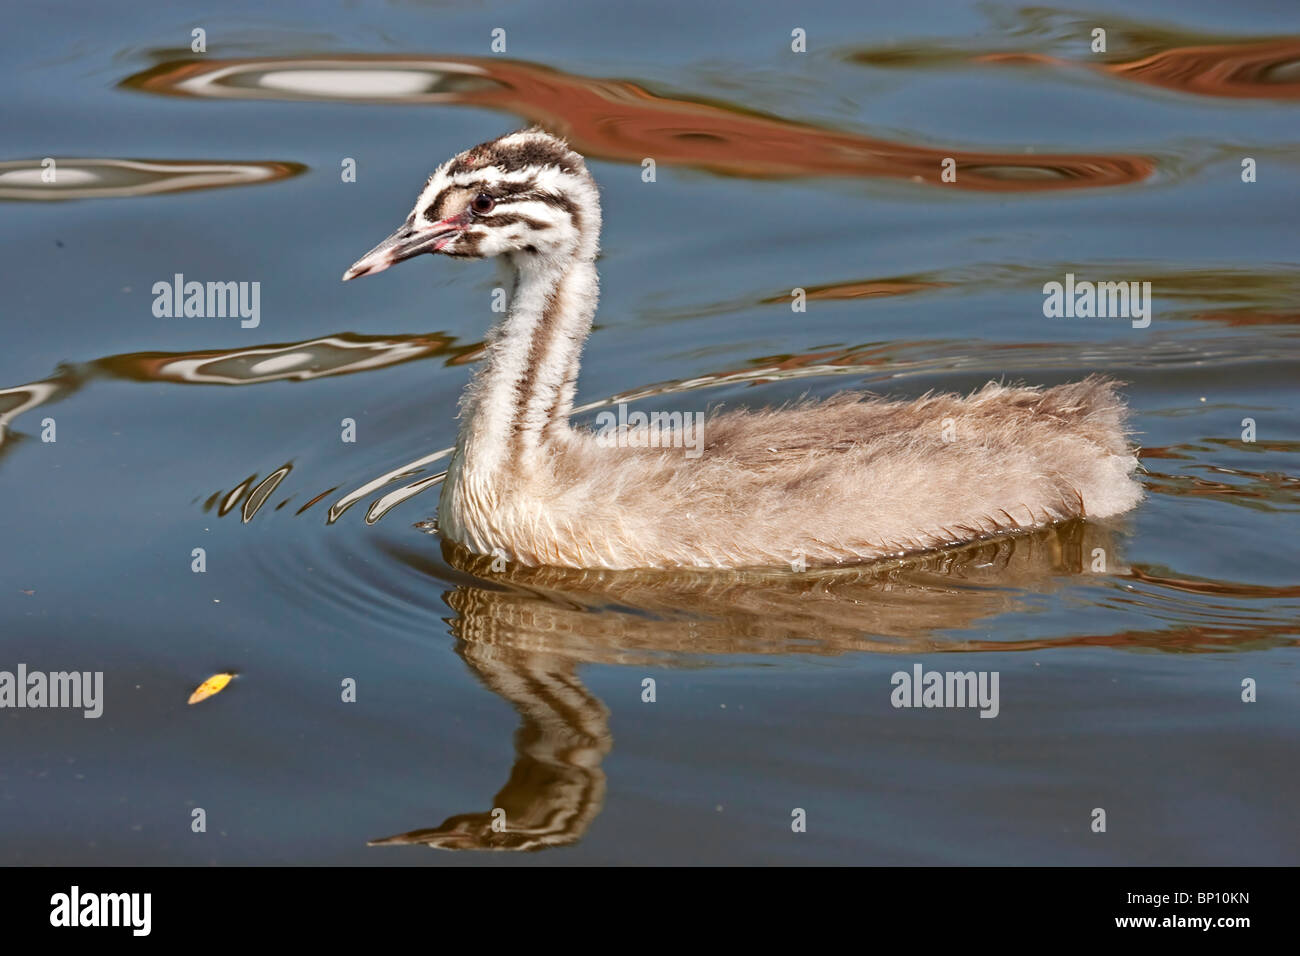 great crested grebe (Podiceps cristatus) single chick swimming on water with reflection, Norfolk, England, UK, Europe Stock Photo